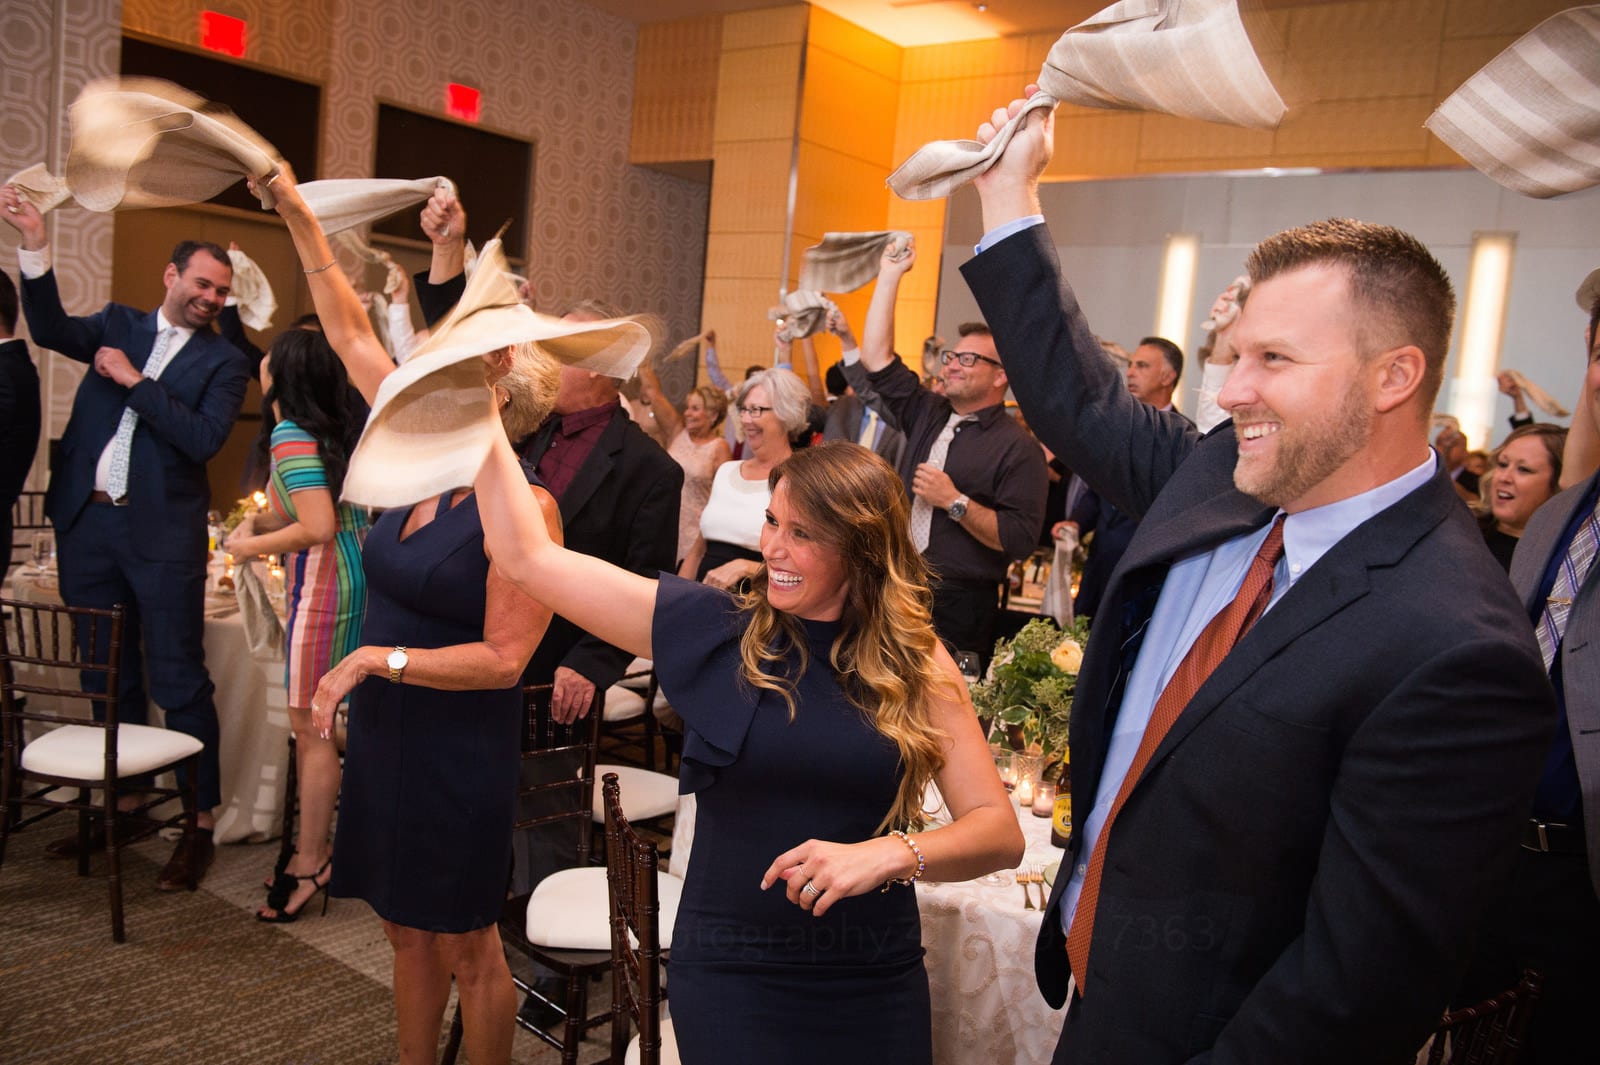 Smiling guests waving napkins above their heads during a Wedding Photography at Fairmont Hotel Pittsburgh.